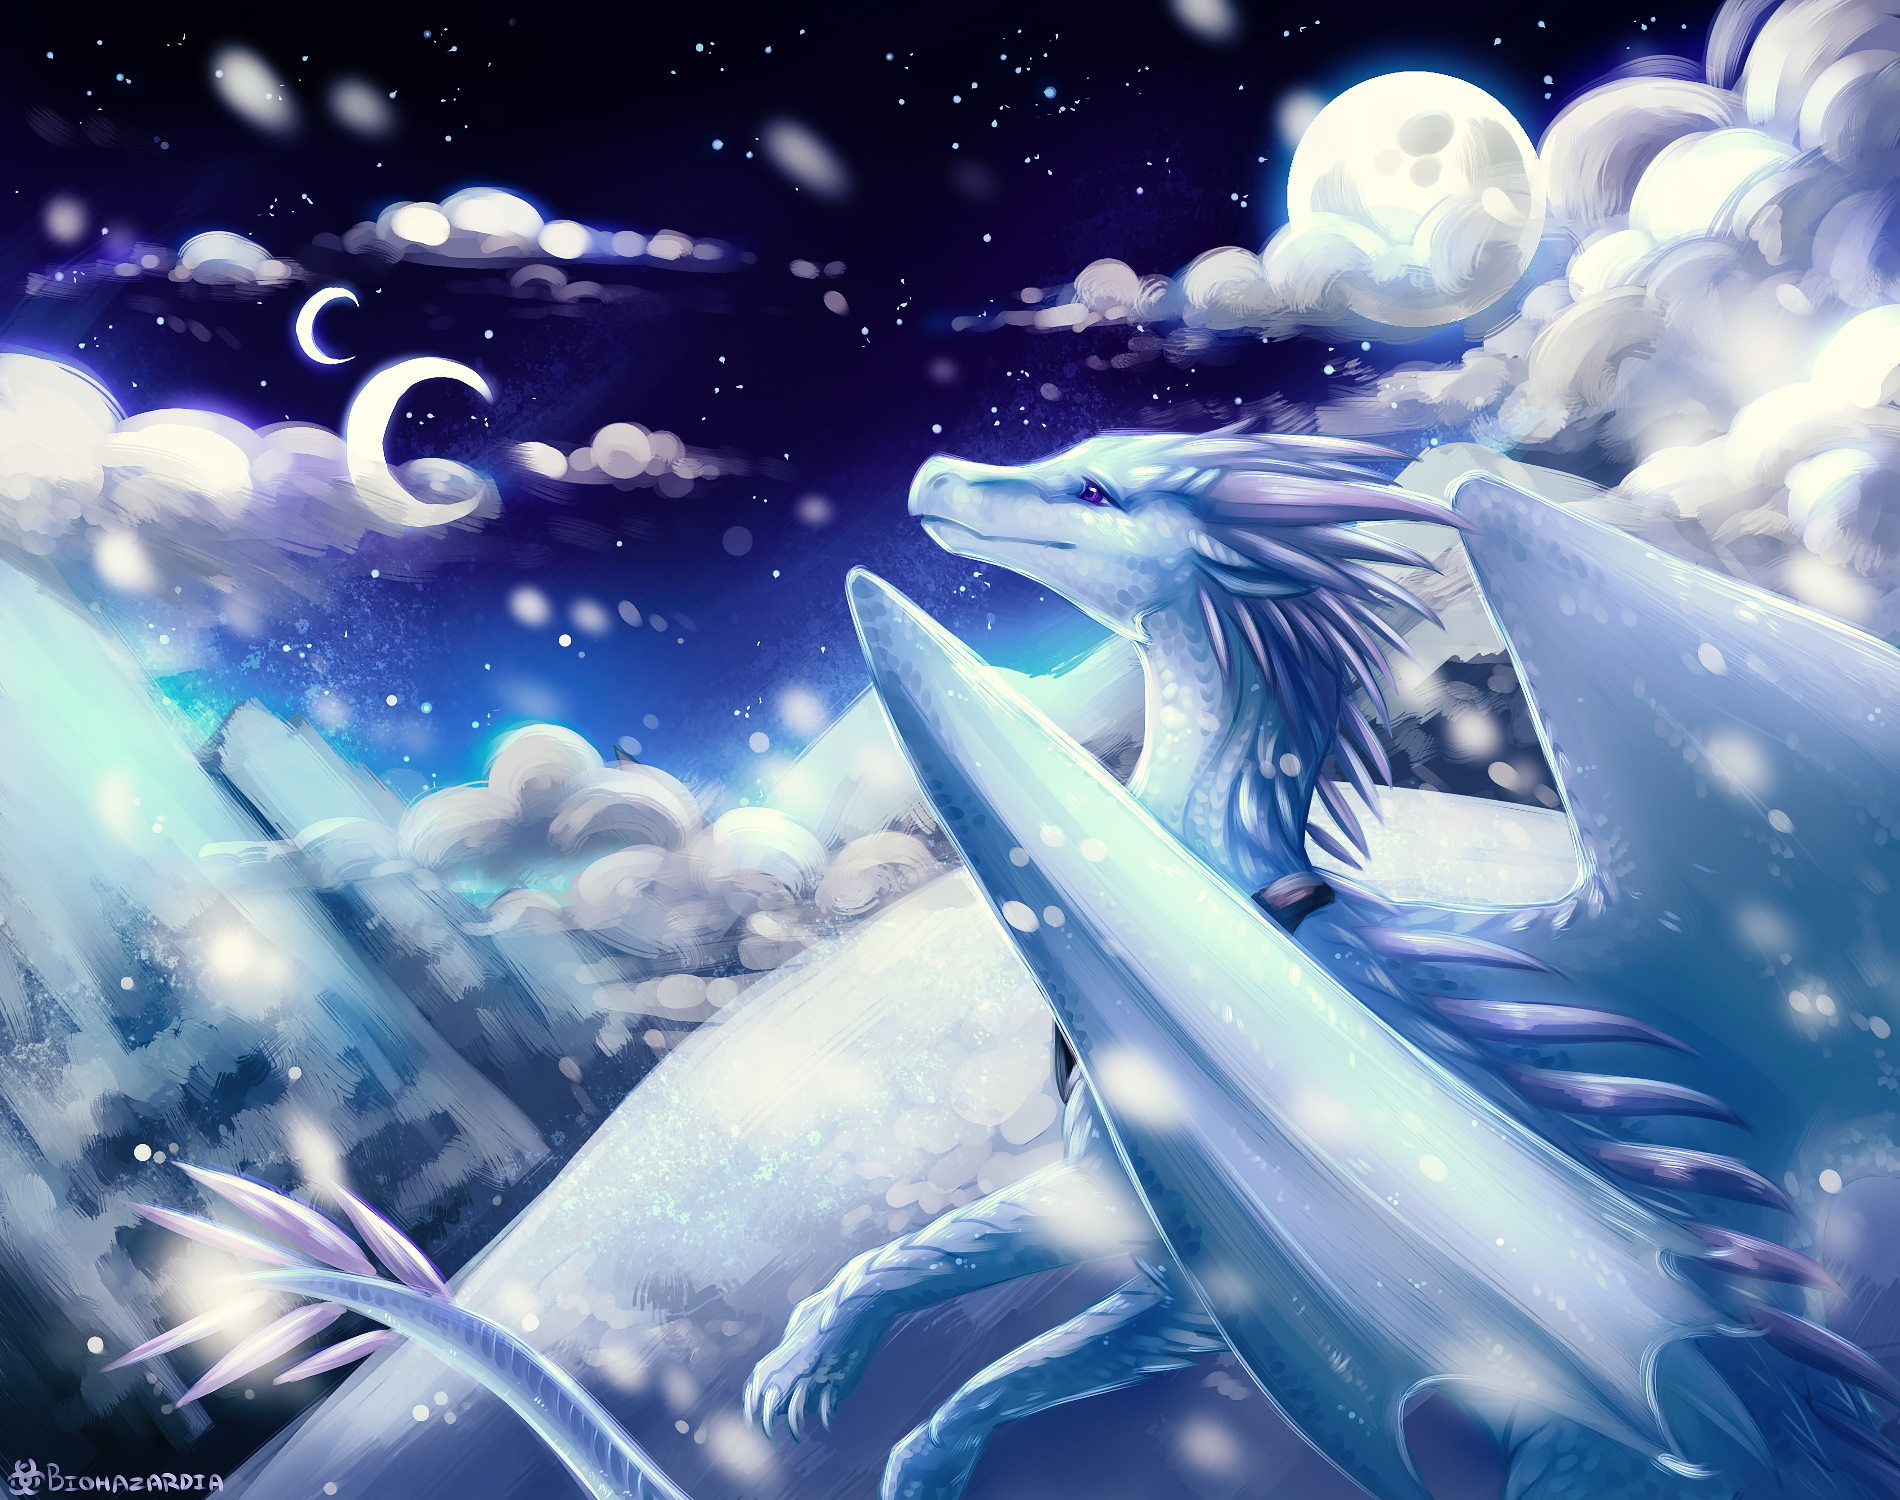 Spire The IceWing Was A Halfbody Painted Complex Background Commission For SamL119!. Wings Of Fire Dragons, Wings Of Fire, Fire Art